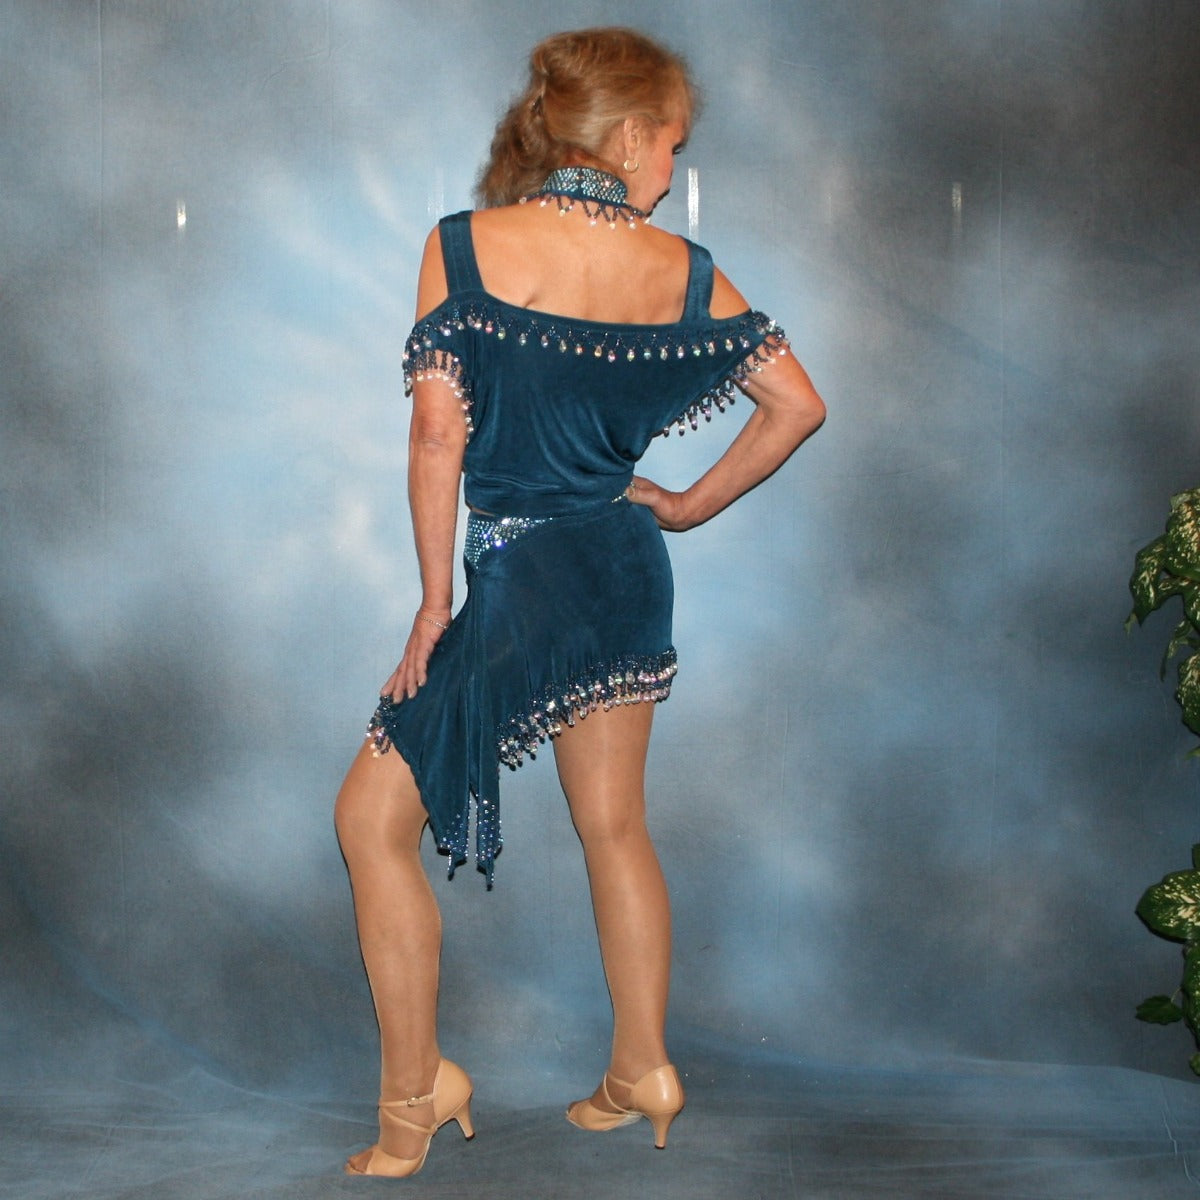 Crystal's Creations back view of  2 piece blue Latin/rhythm dance dress was created of deep sea blue luxurious solid slinky with cascades of hand beaded fringe plus light sapphire Swarovski rhinestone work. The Latin dance skirt has built in tights.